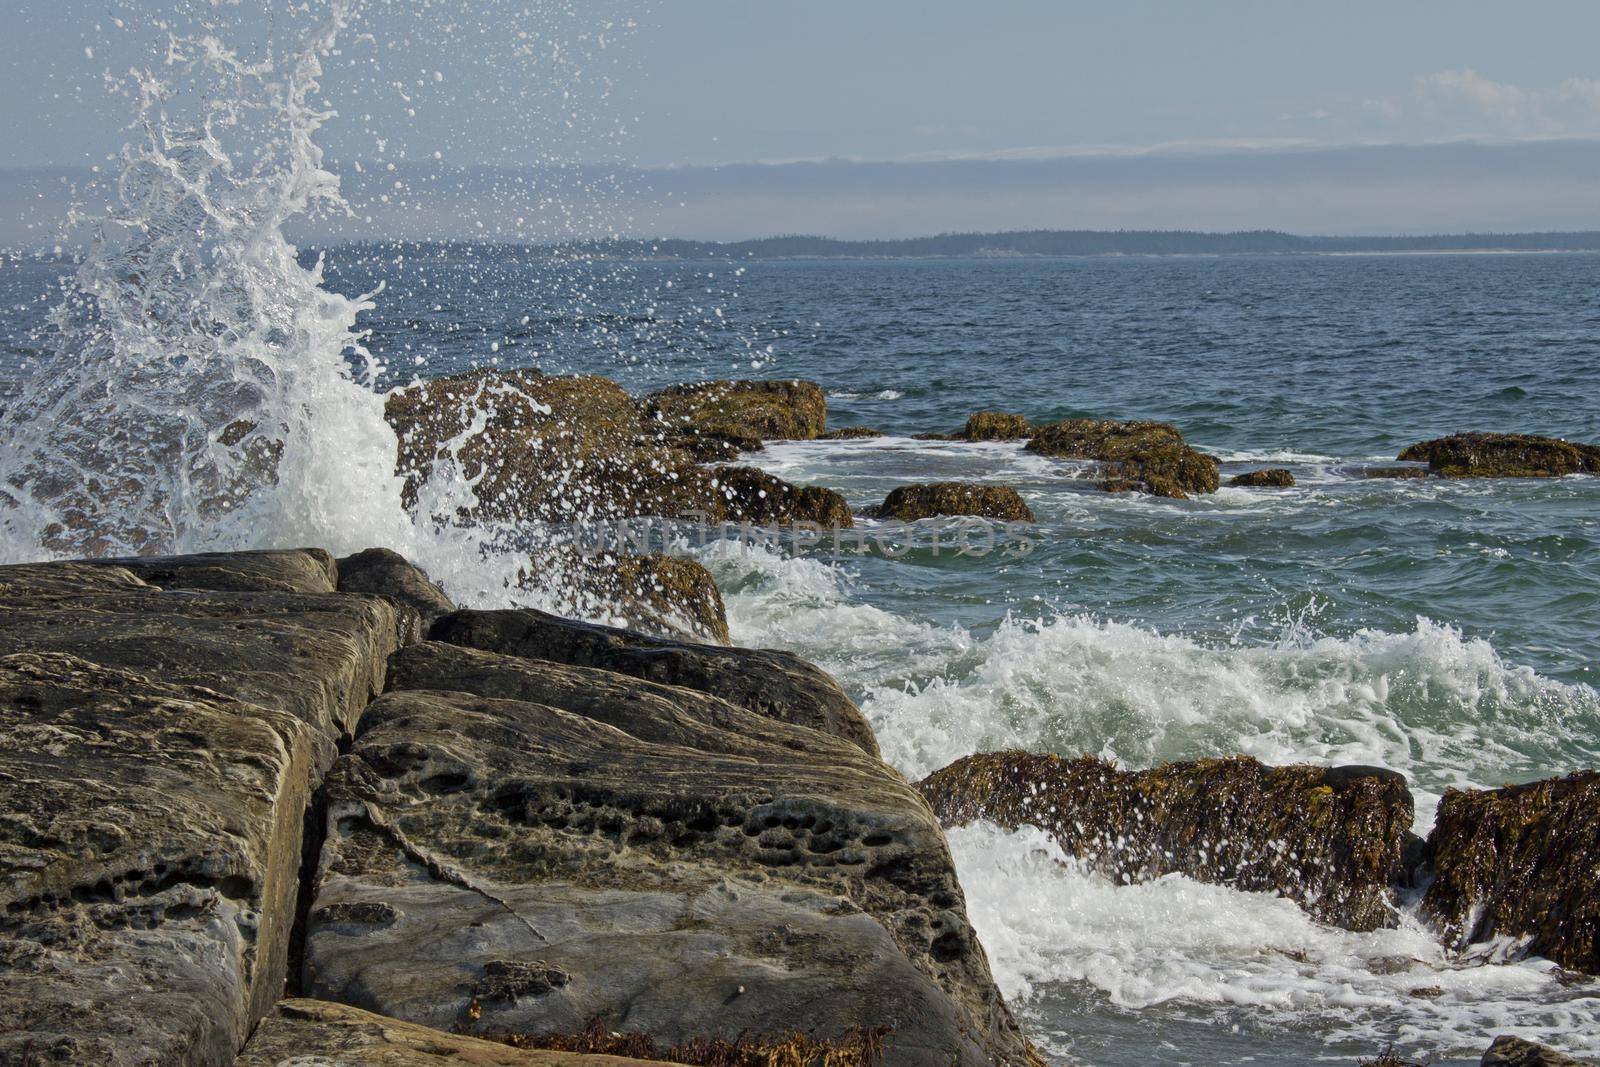  ocean spray and surf pounds against rocks on the coast